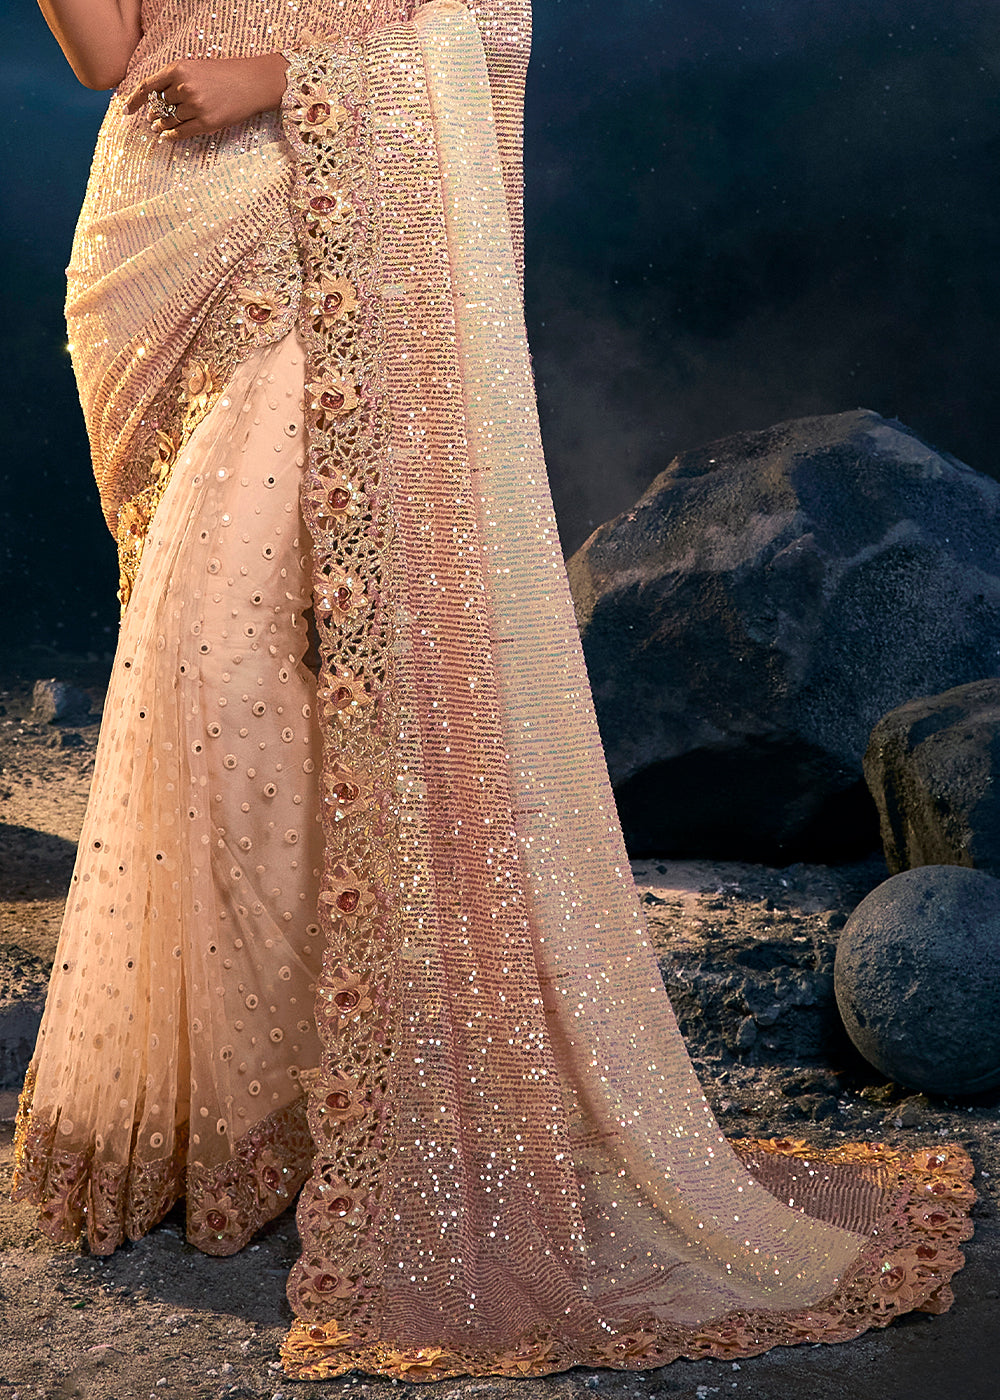 Charming Pale Peach Embroidered Saree with Exquisite Detailing